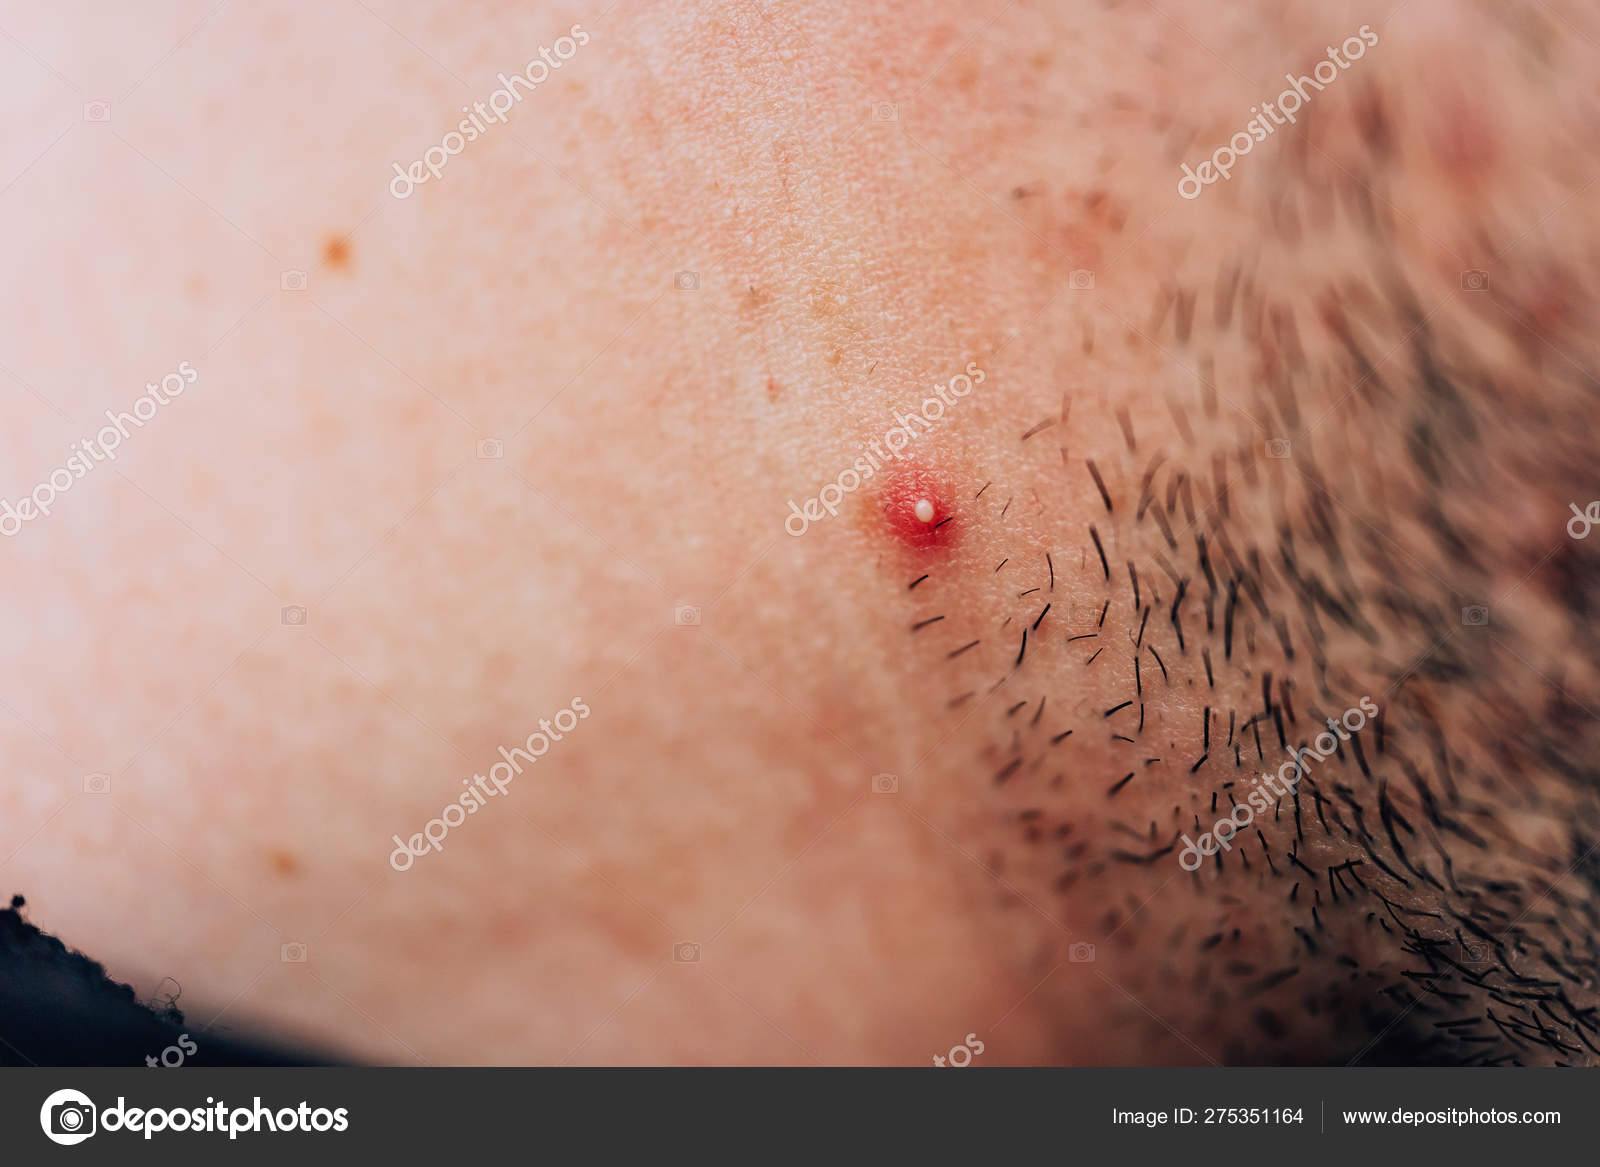 The human body. Shoulder joint Skin texture Strap off the bra. Pimple on  the skin. Inflammatory process. Bruise. Moles on the body. Stock Photo